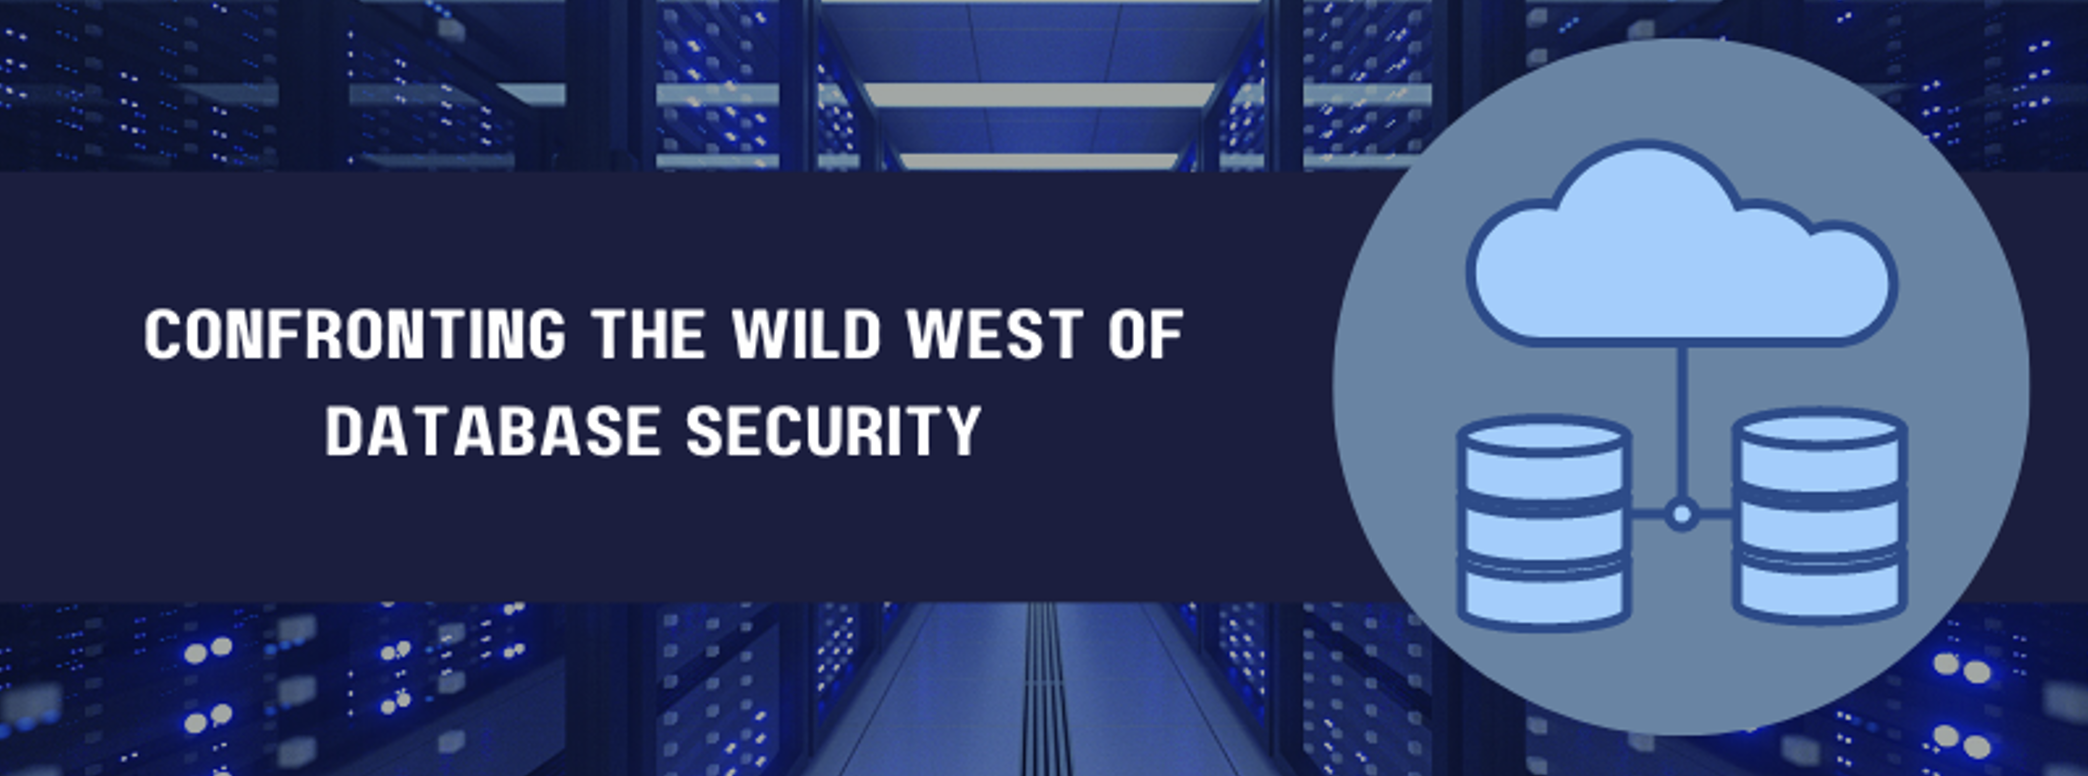 Confronting the Wild West of Database Security